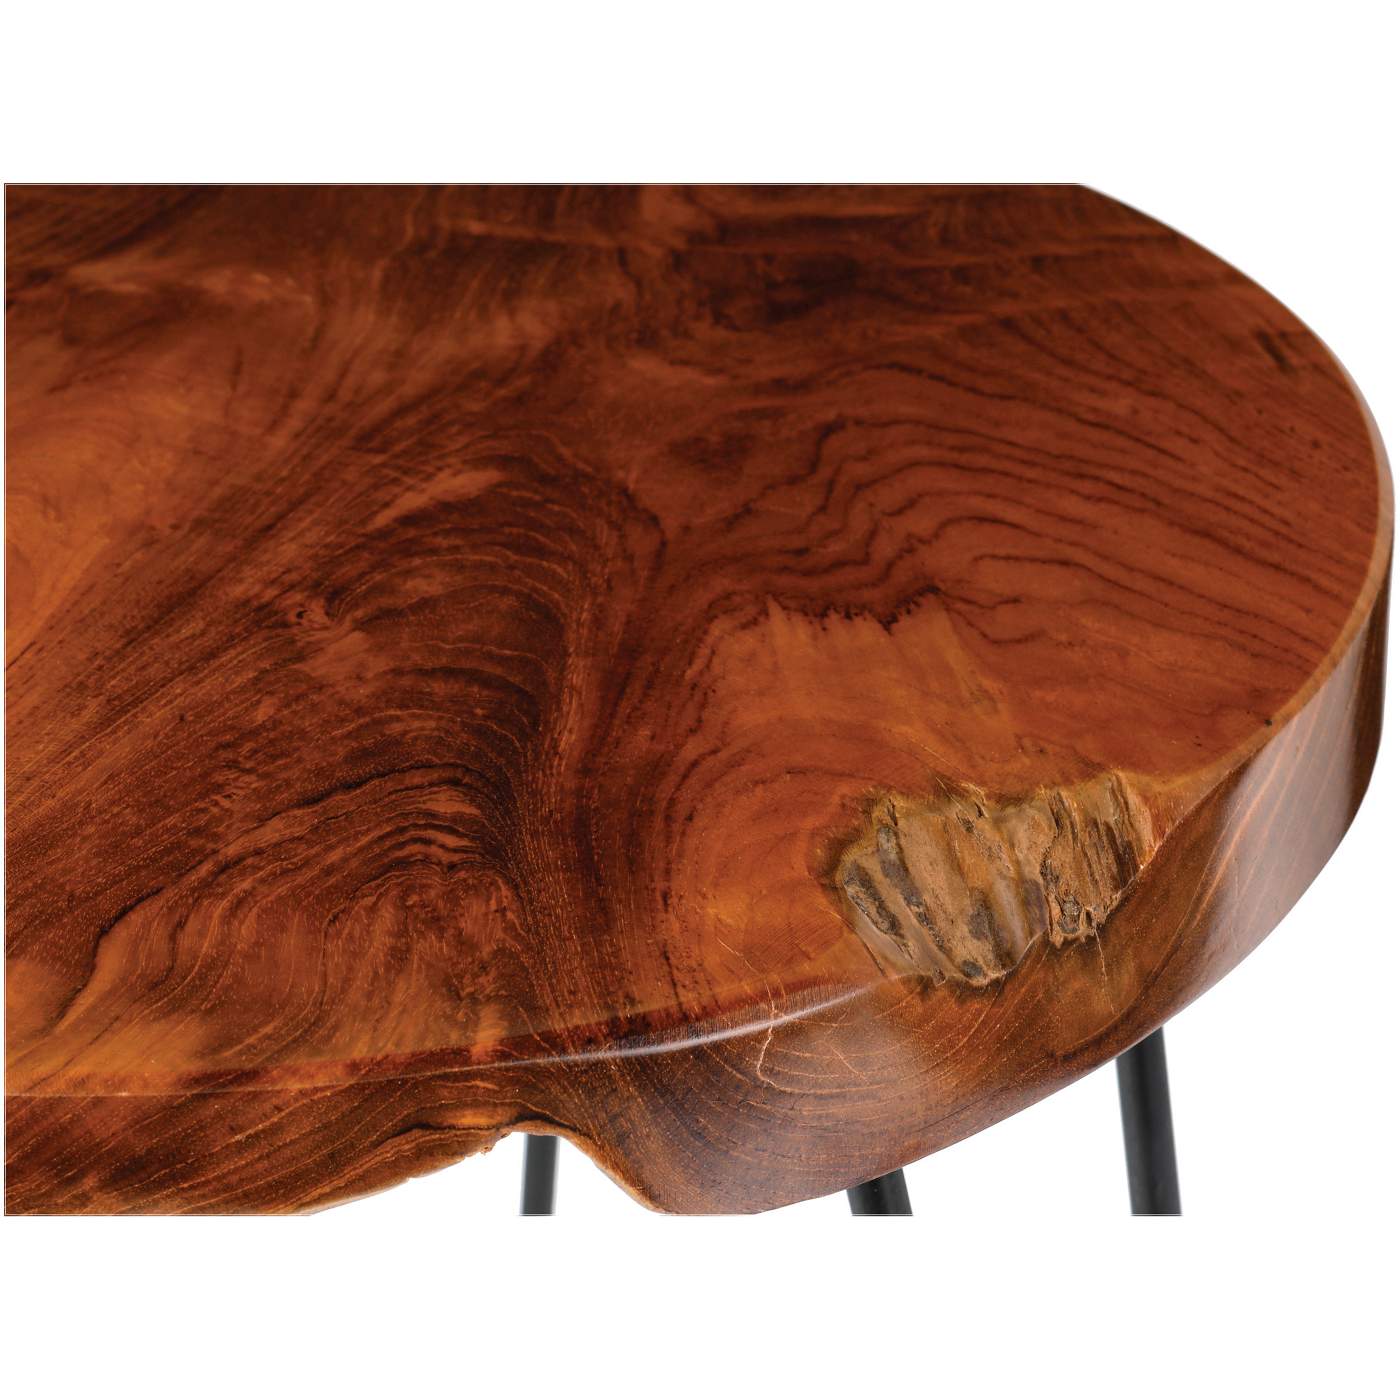 Haven + Key Metal Accent Table with Live Edge Top; image 2 of 2